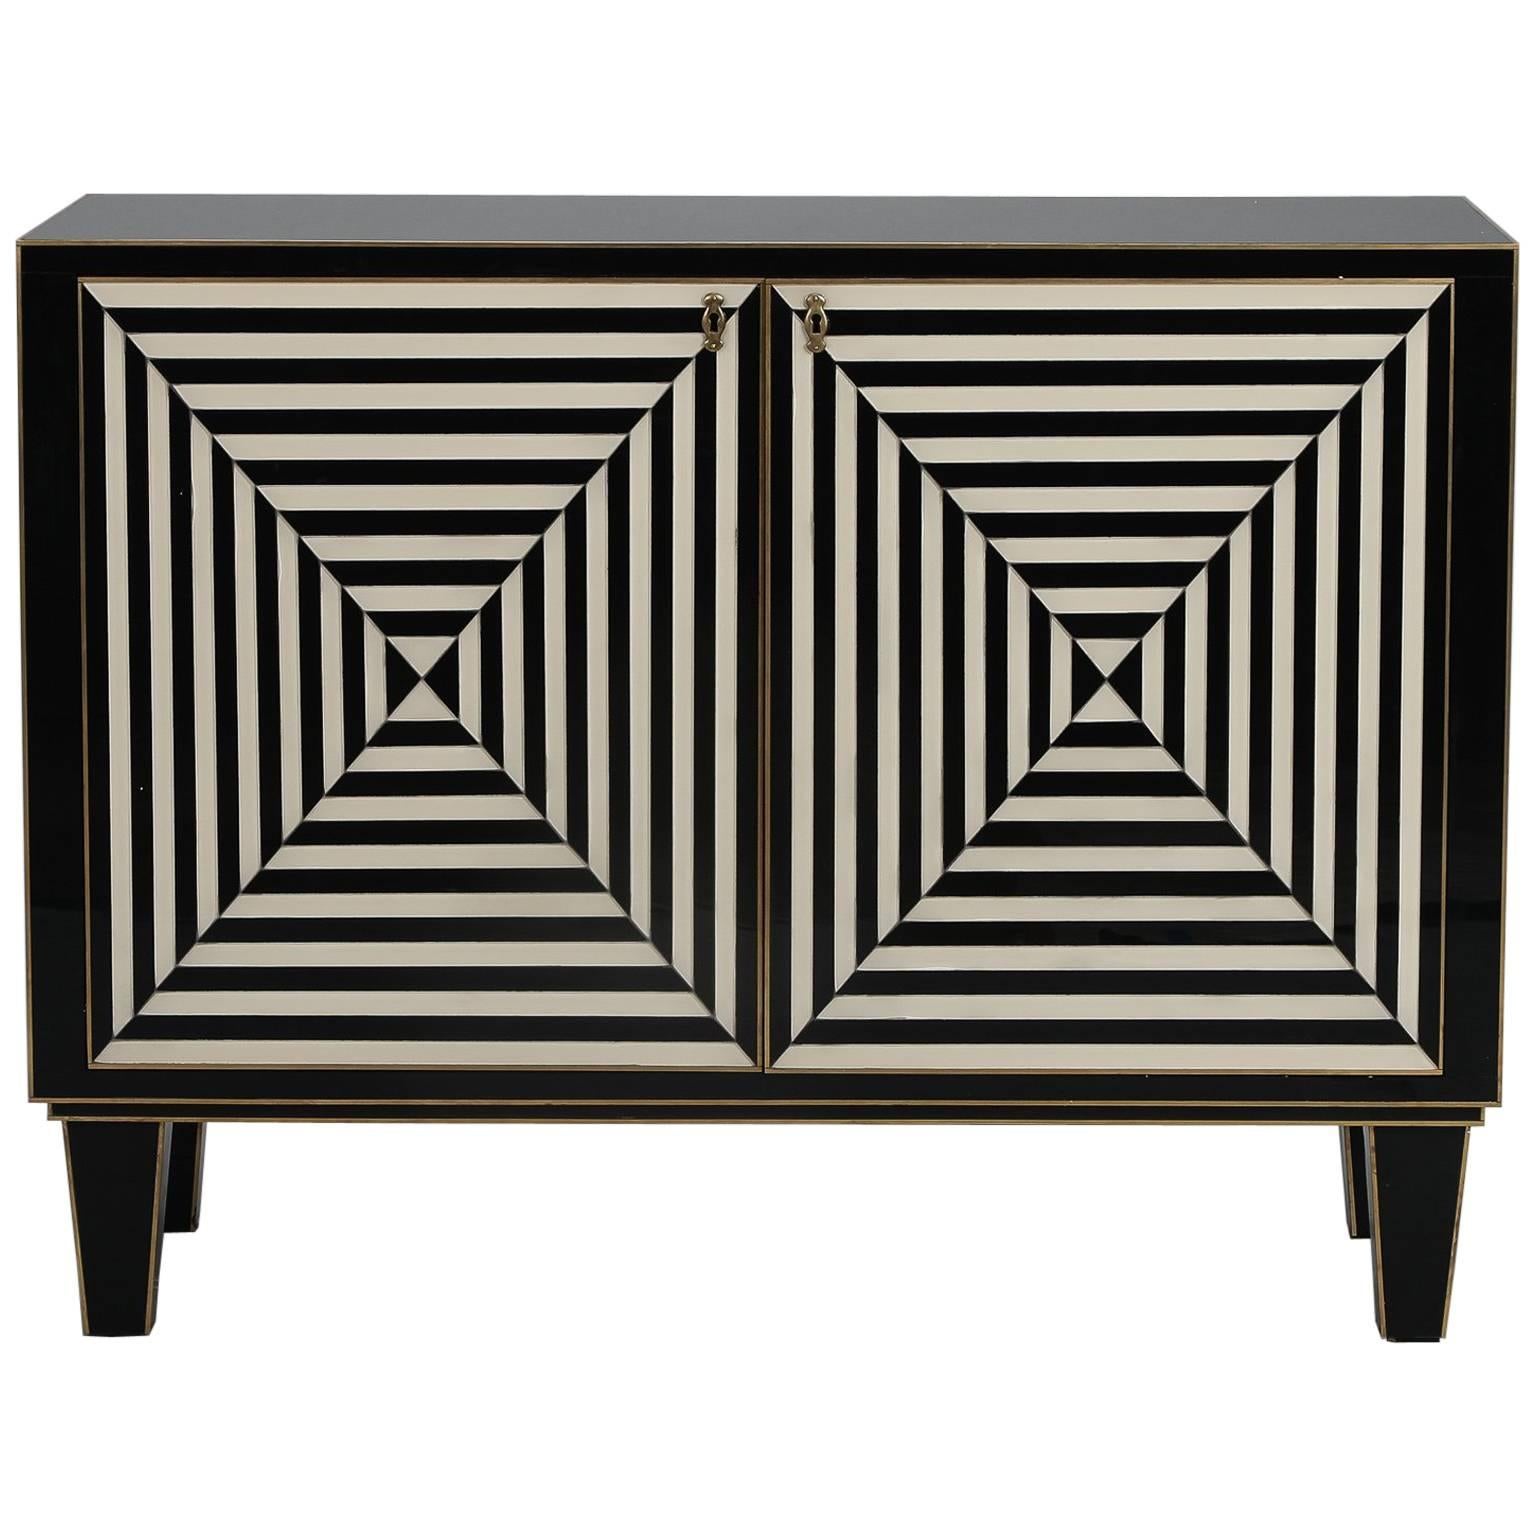 Custom-Made Op Art Black and White Murano Glass Clad Cabinet